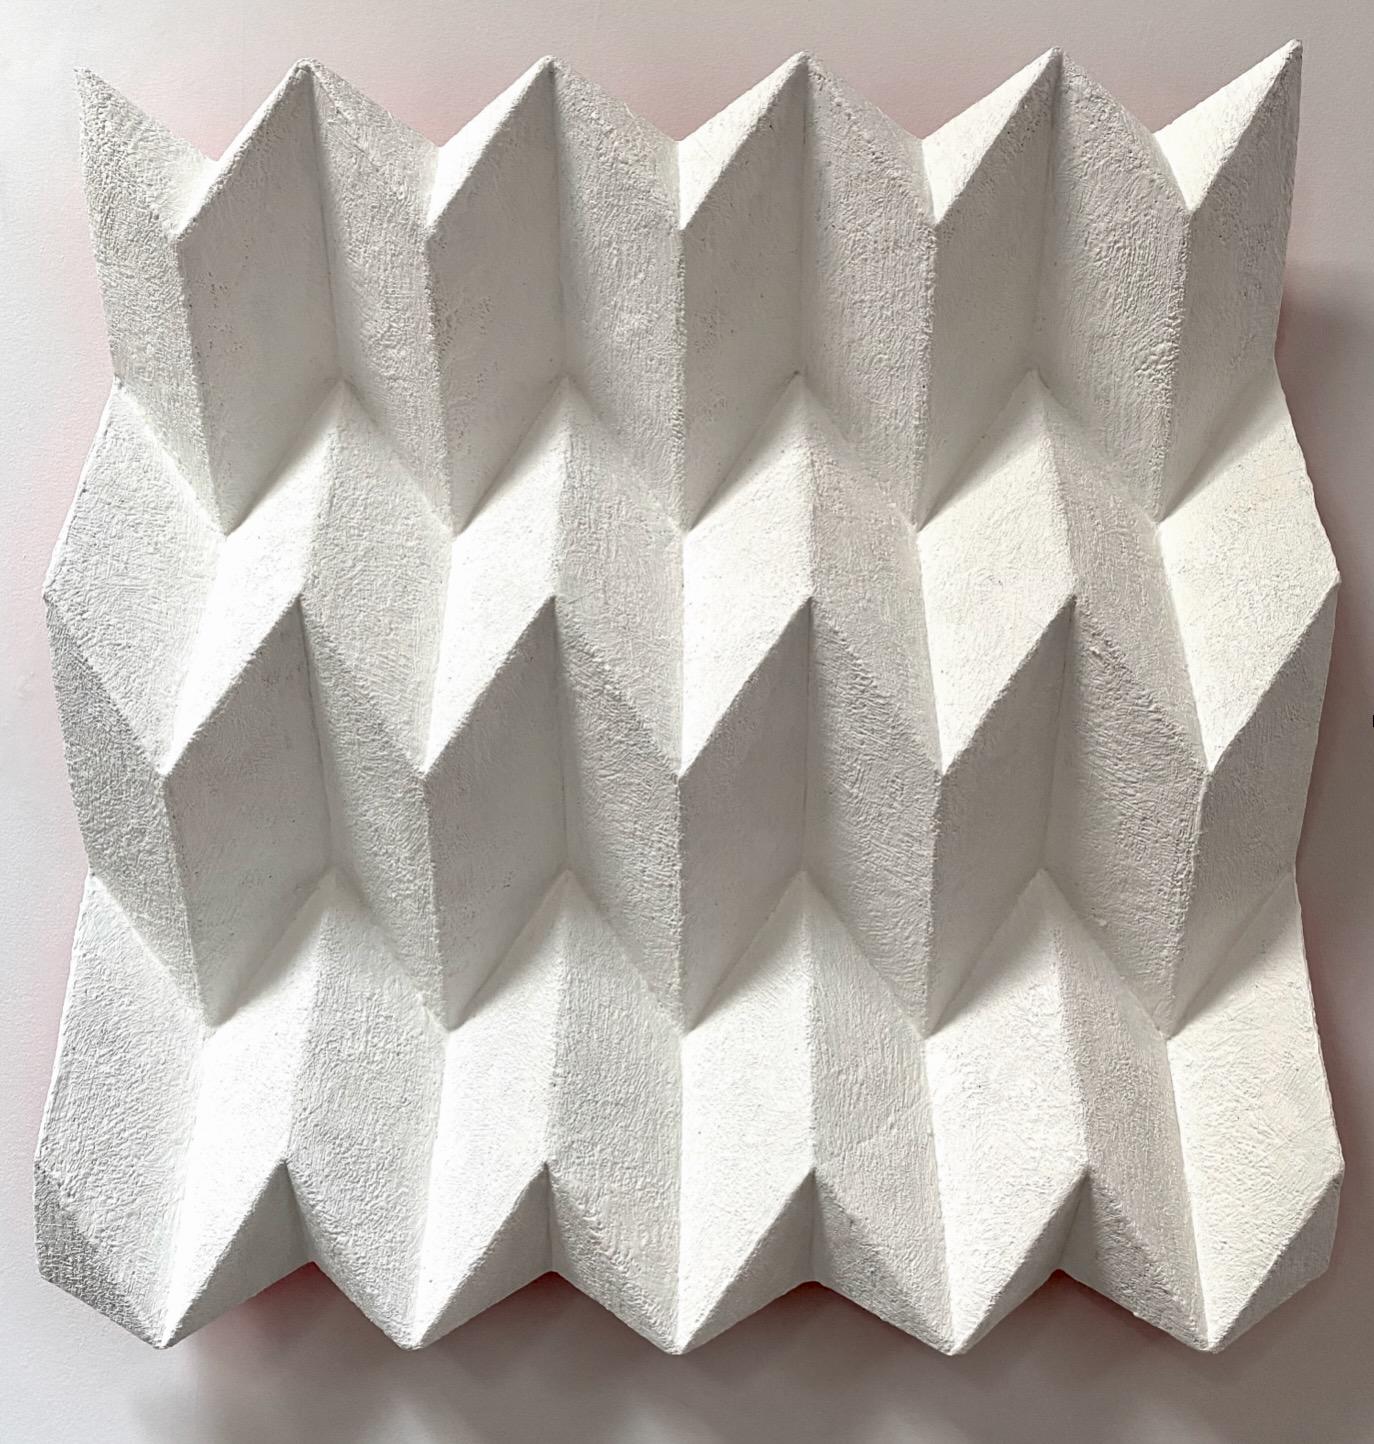 David Brown Abstract Sculpture - "Corrugation in White"